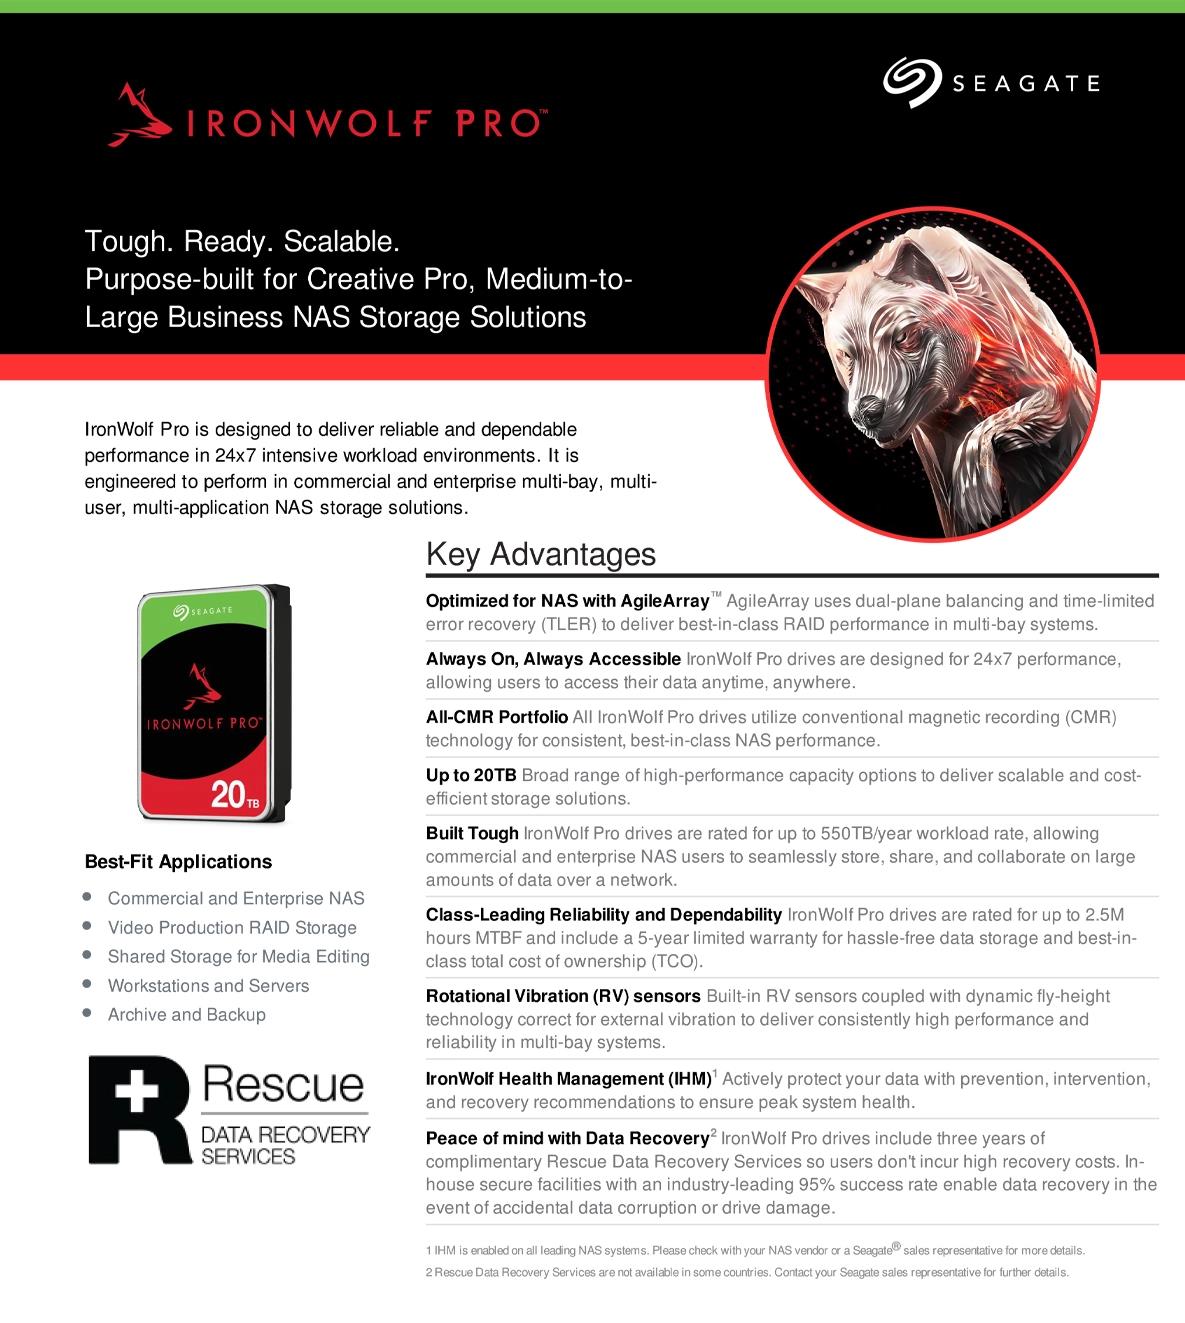 A large marketing image providing additional information about the product Seagate IronWolf Pro 3.5" NAS HDD - 2TB 256MB - Additional alt info not provided